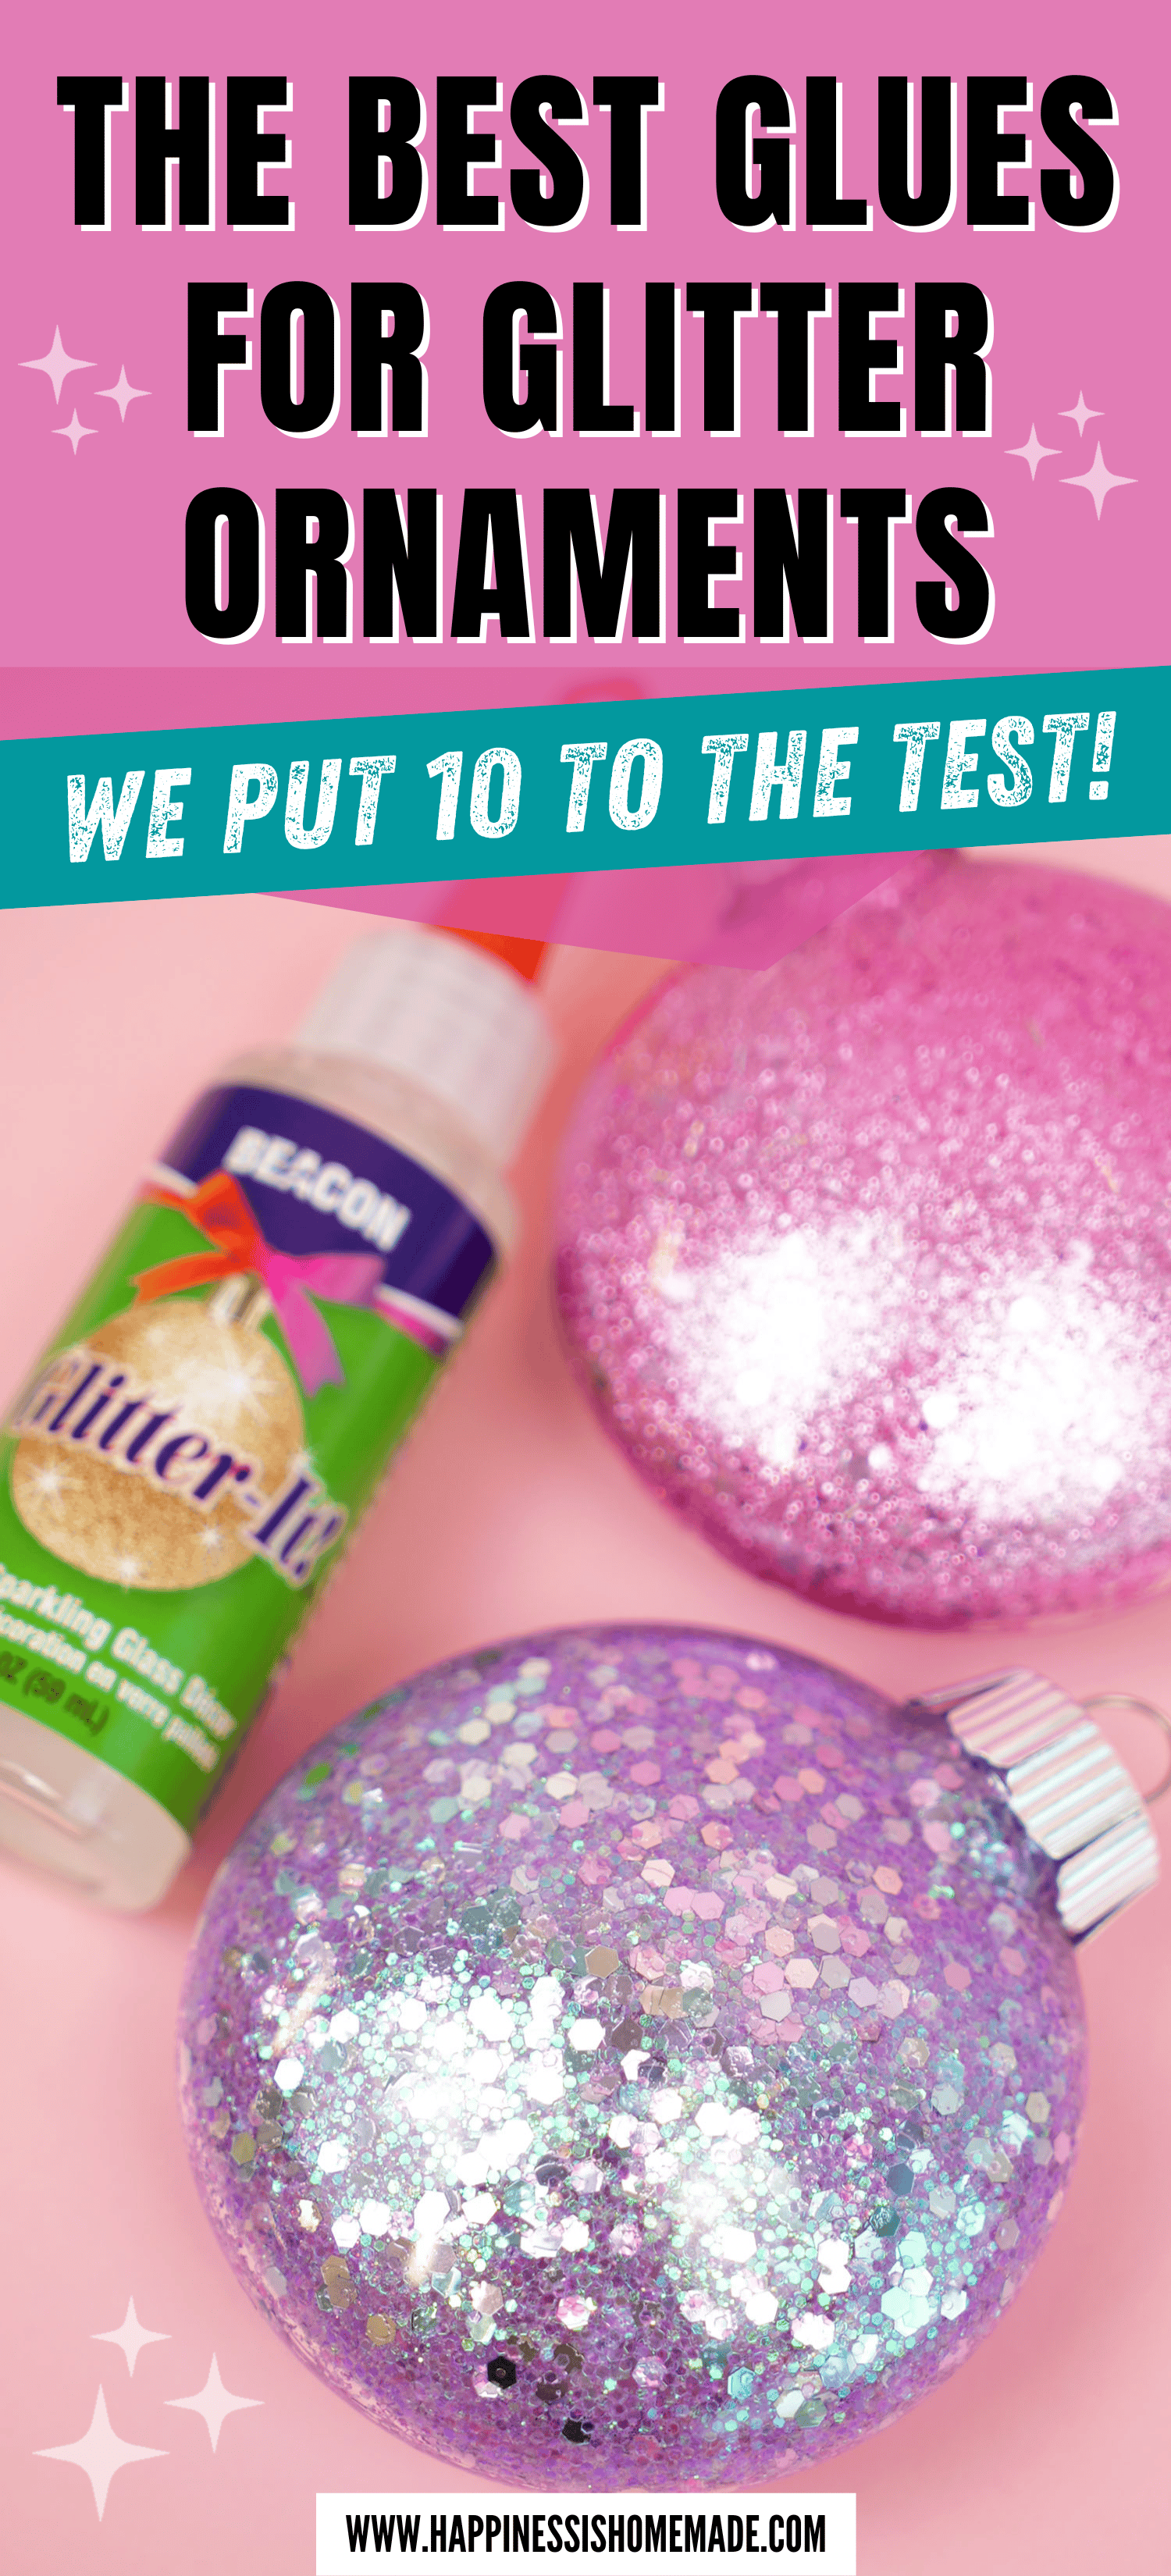 Glitter Wall DIY, Making Your Own Glitter Paint!